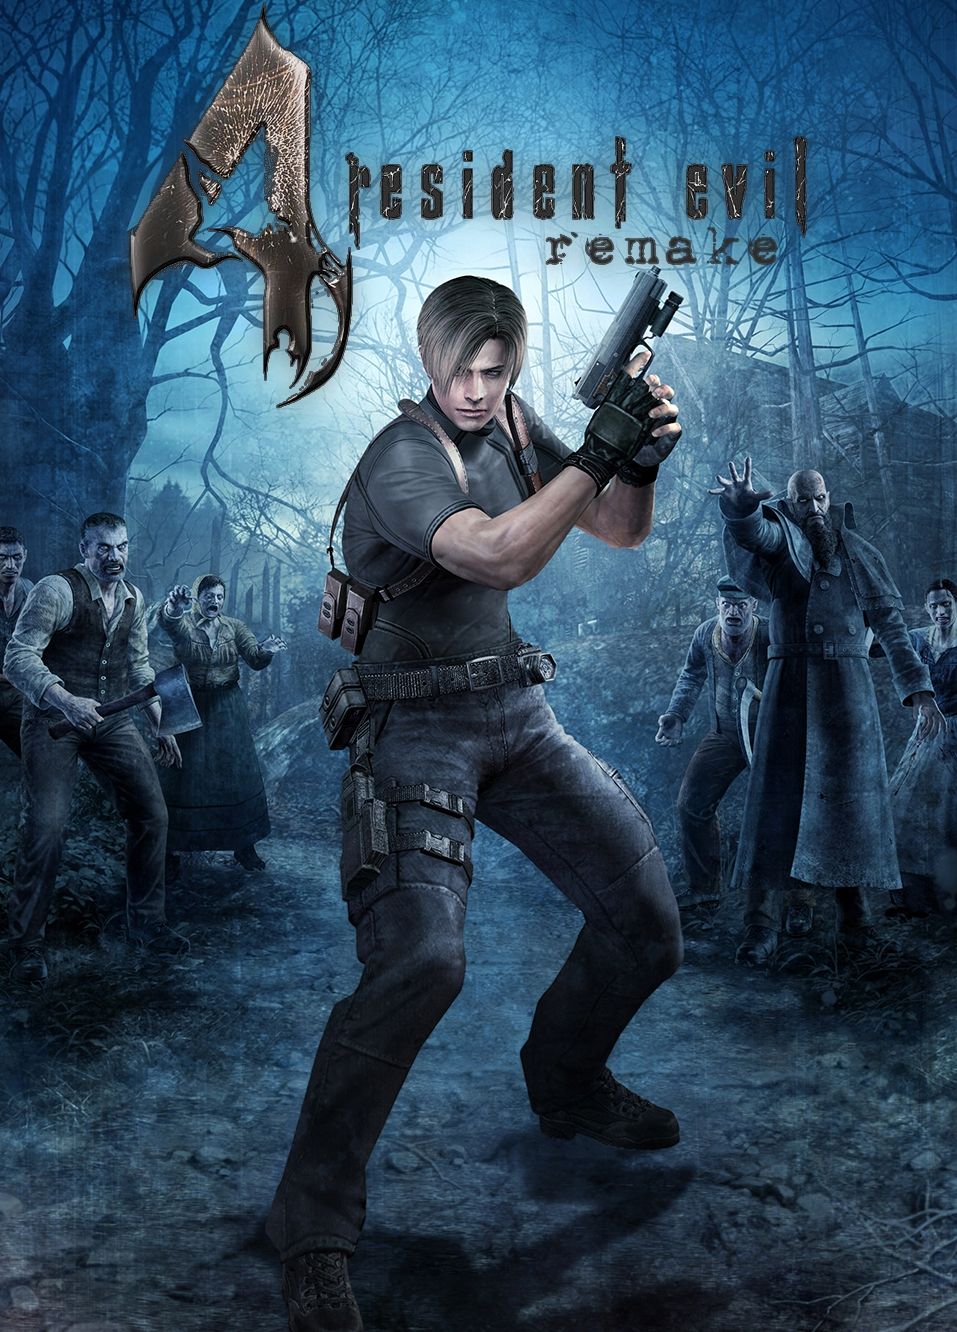 now al we need is the resident evil 4 remake